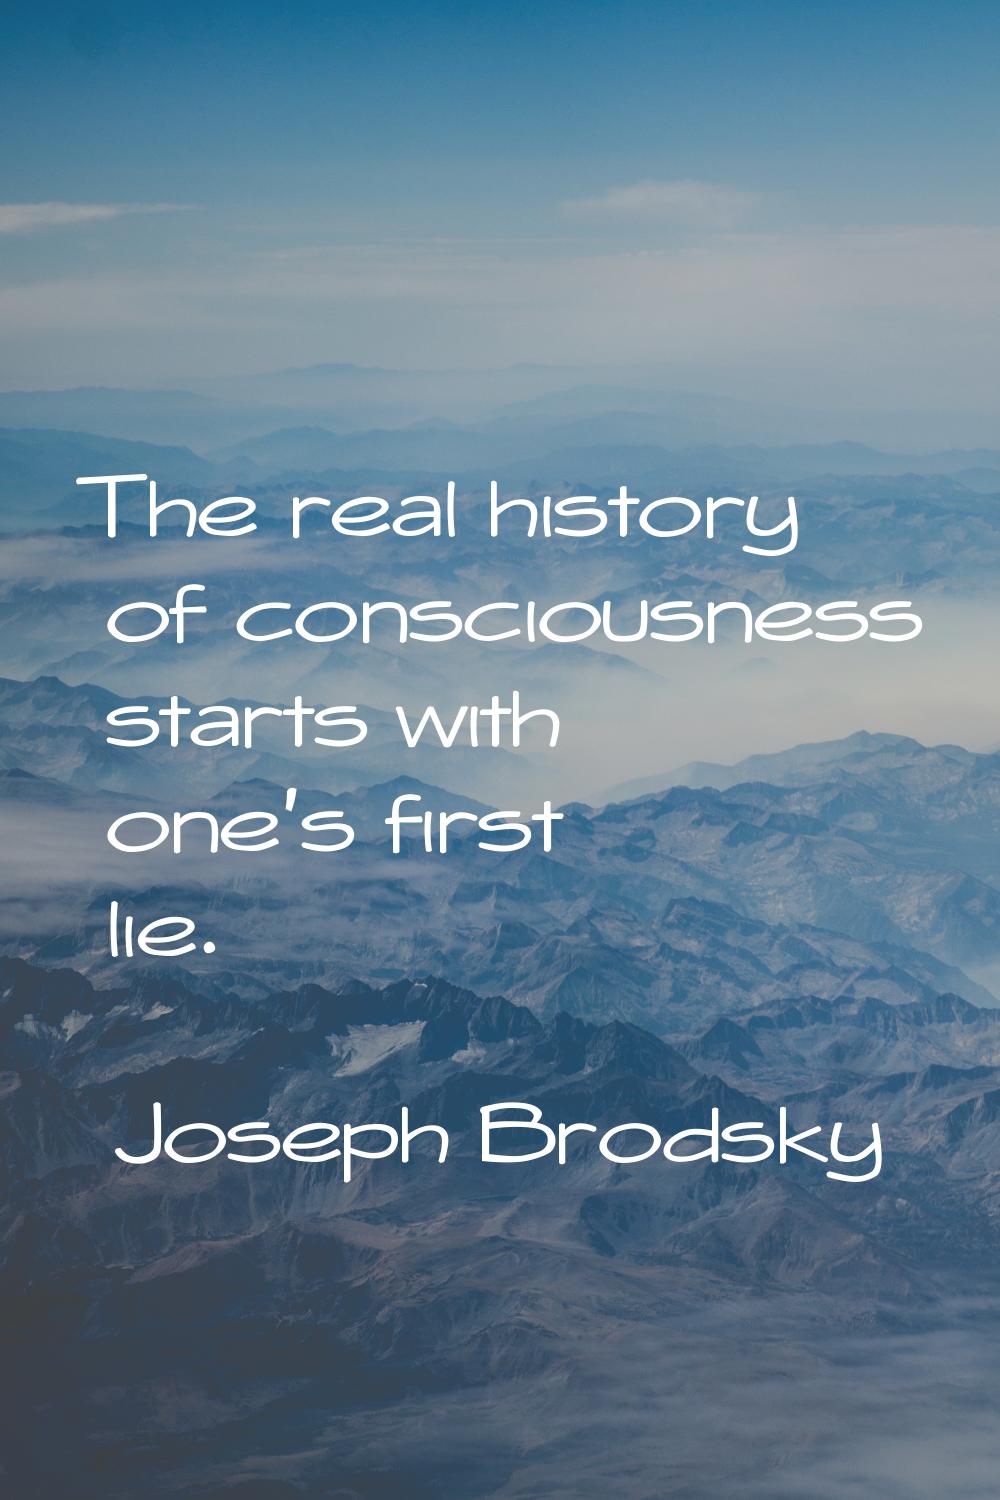 The real history of consciousness starts with one's first lie.